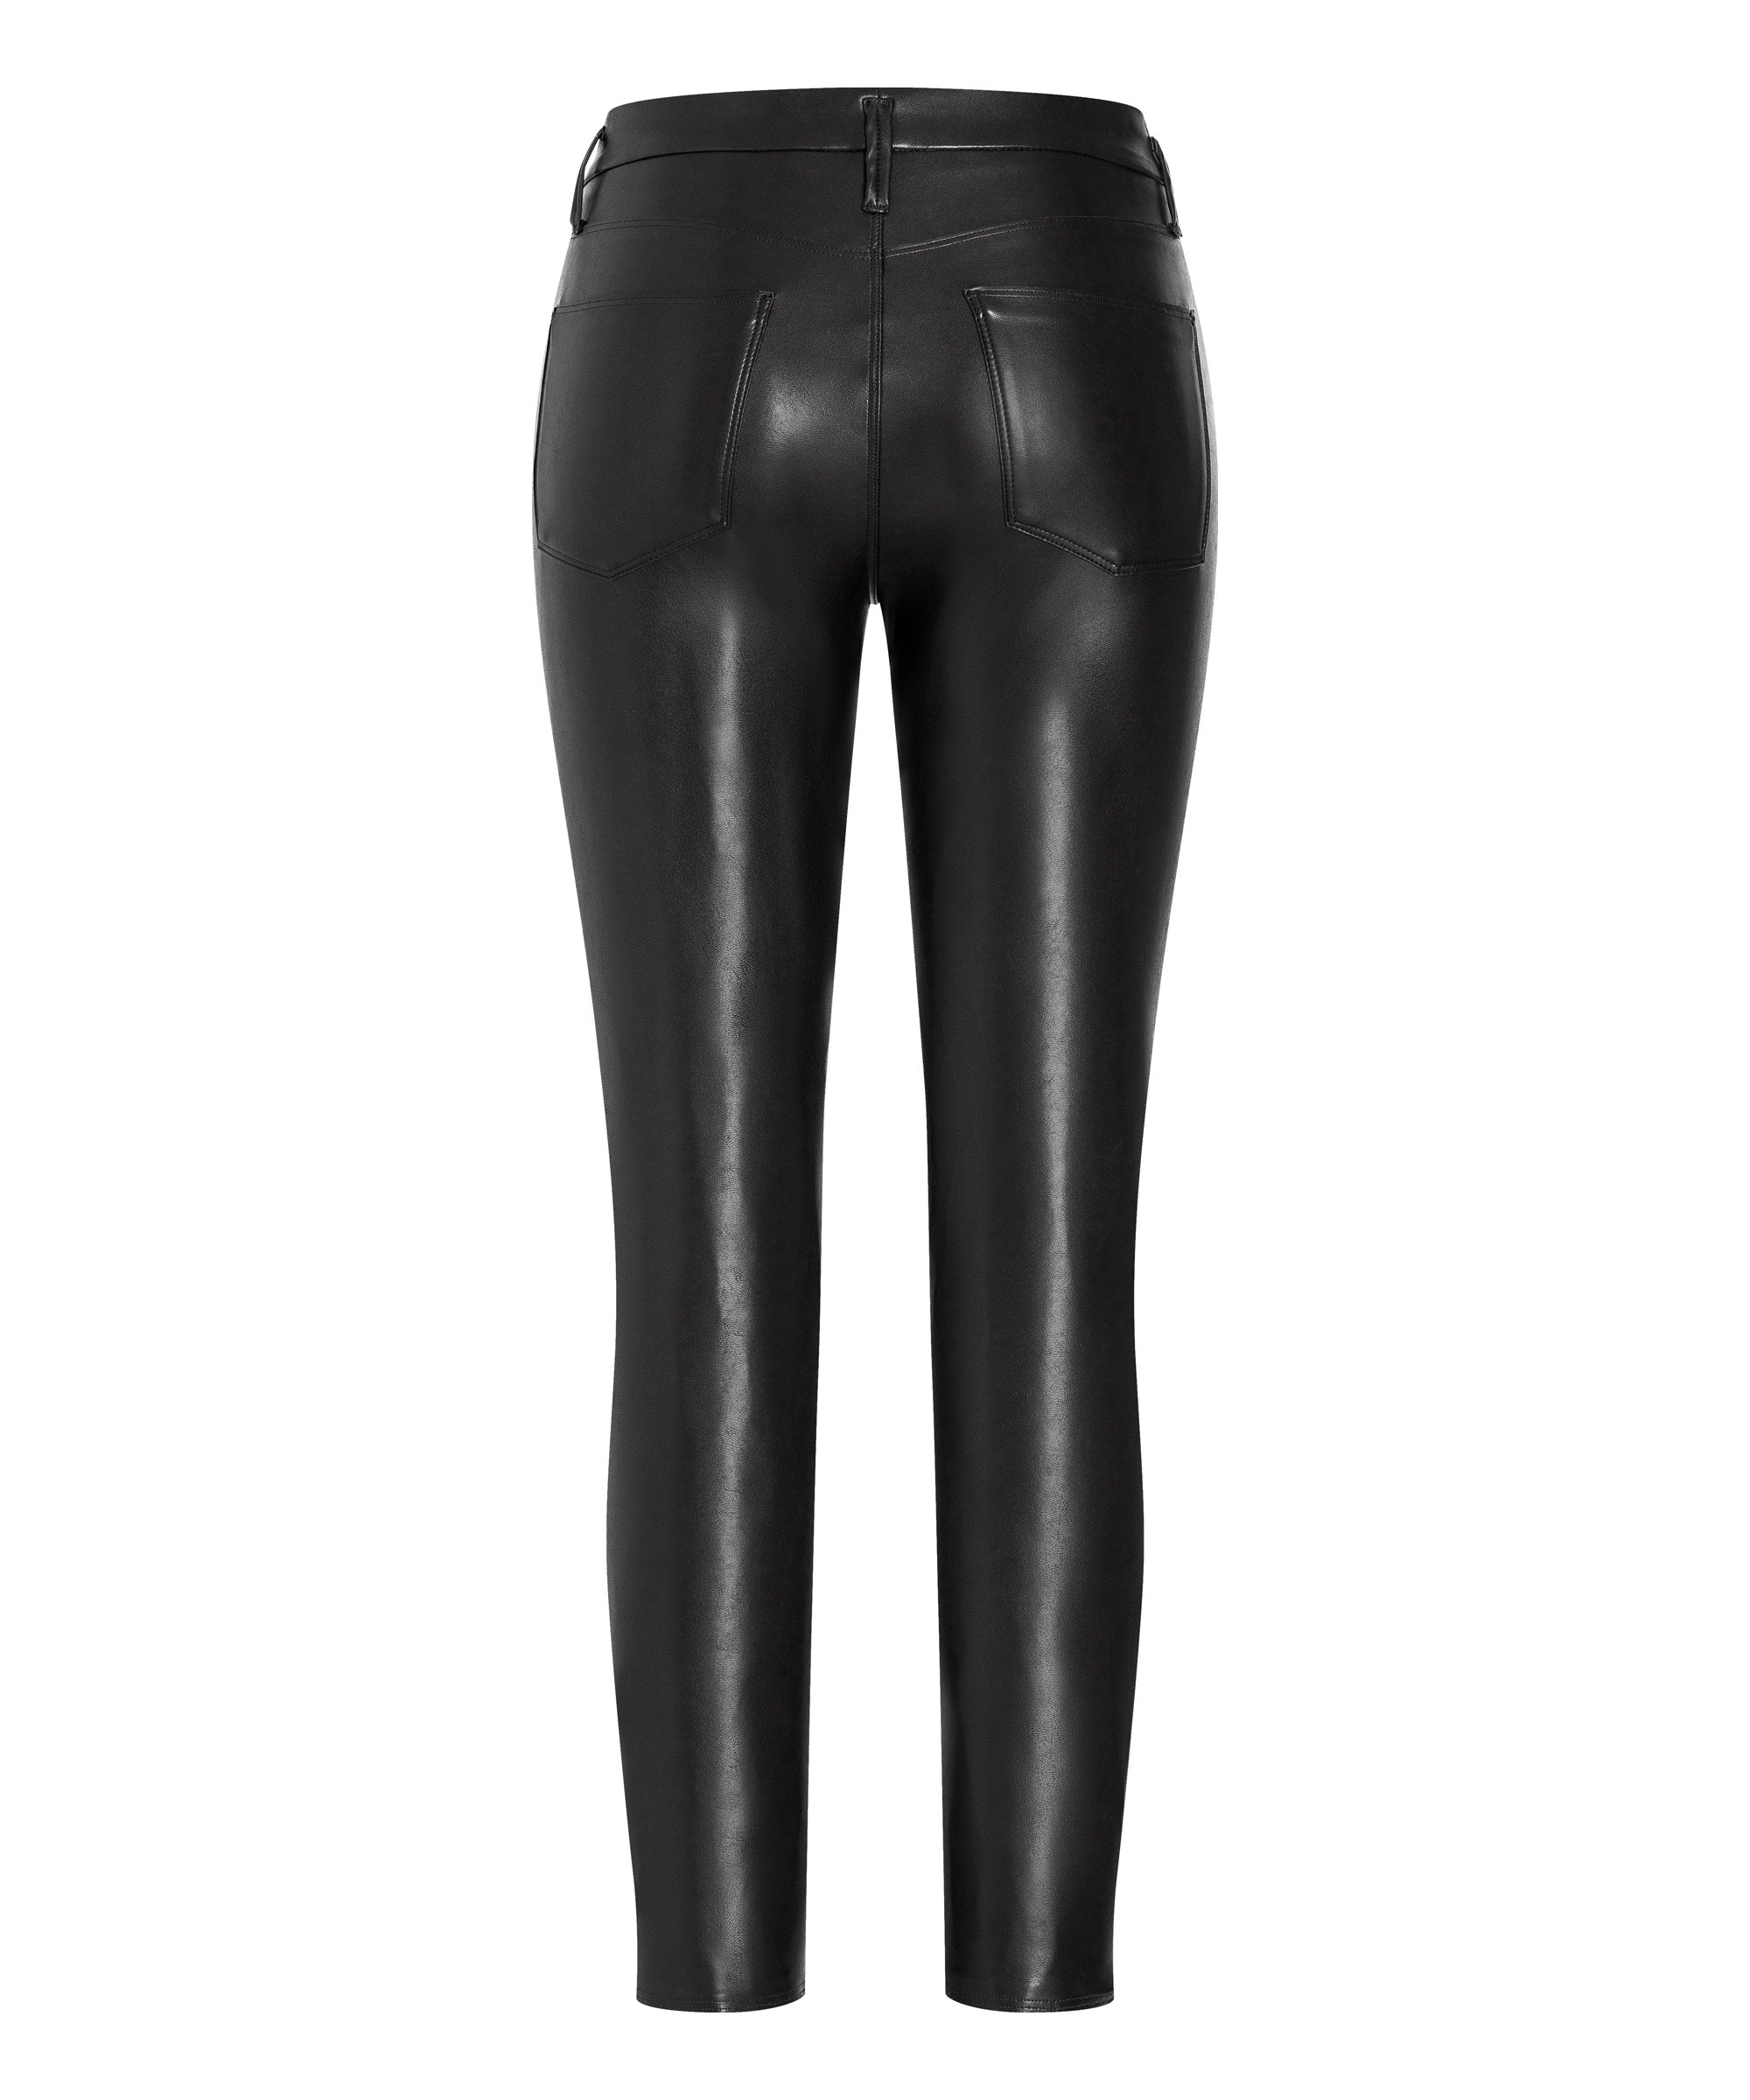 Cambio faux leather pants Ray - 5 pocket BLACK